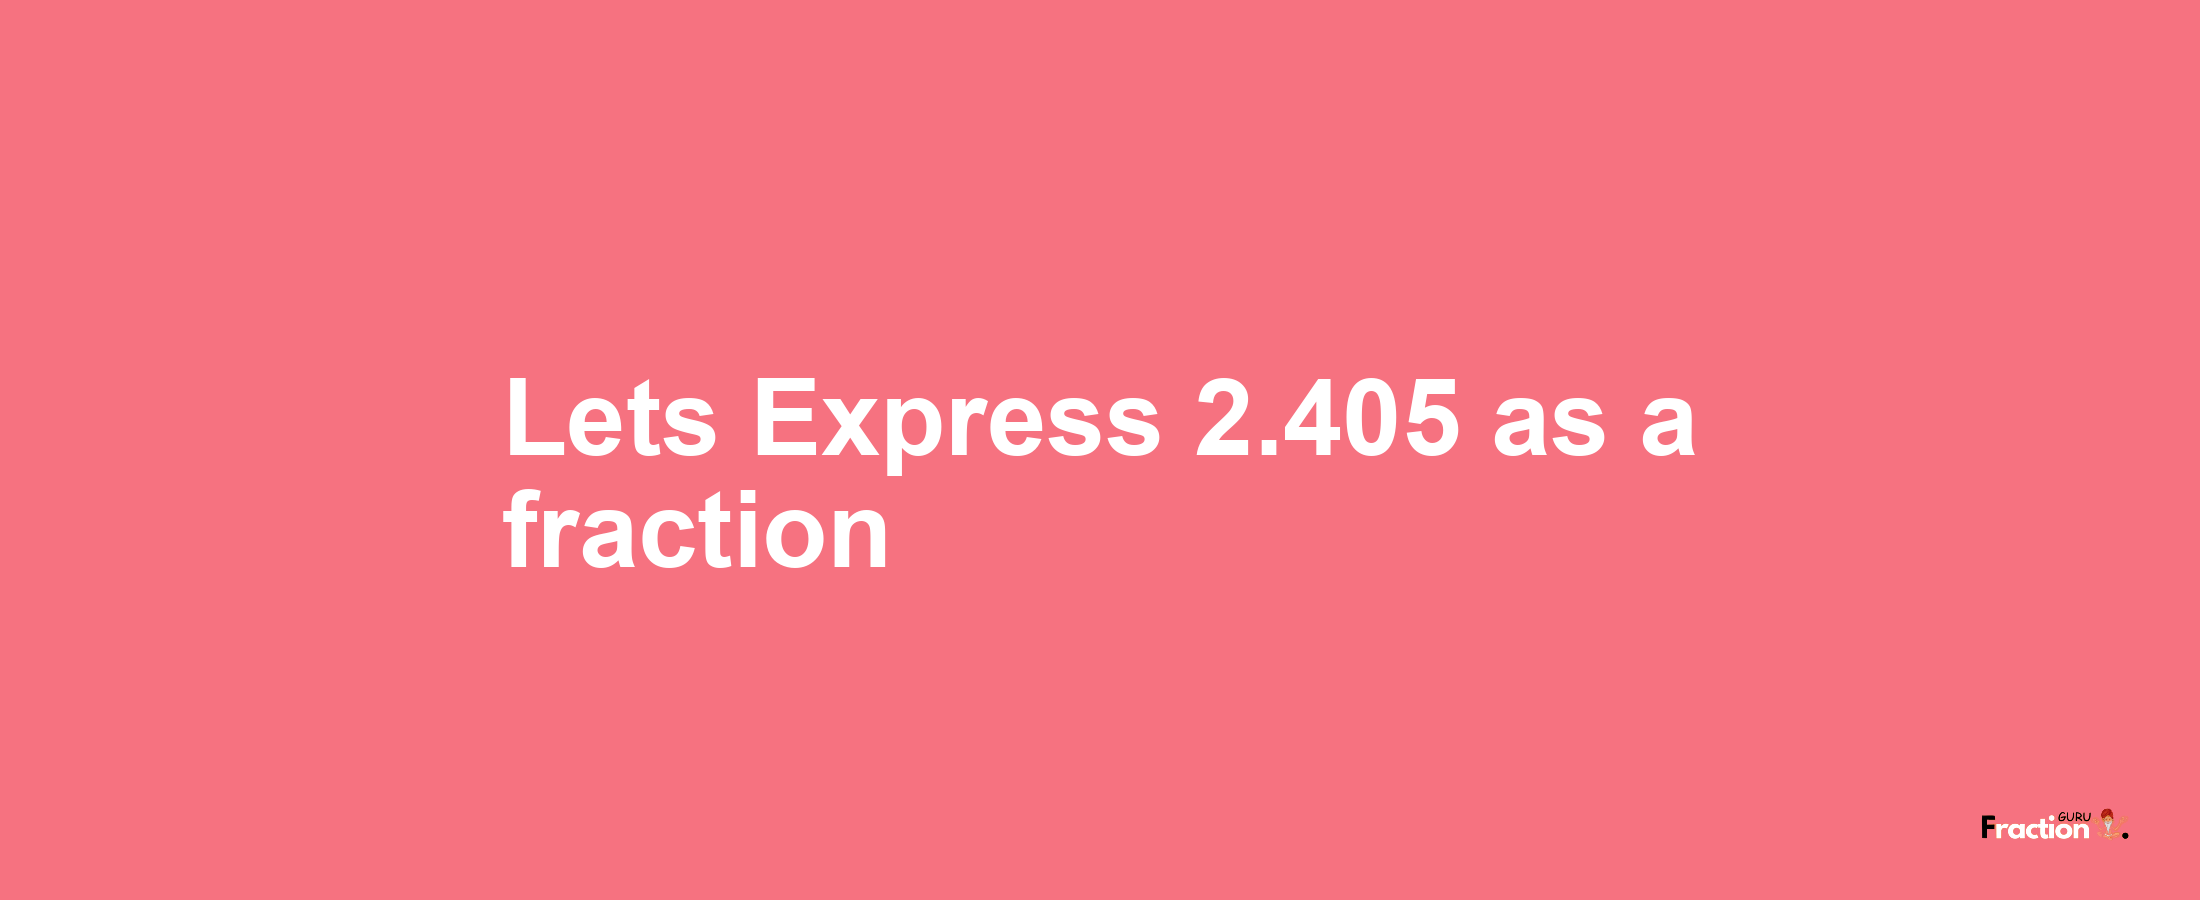 Lets Express 2.405 as afraction